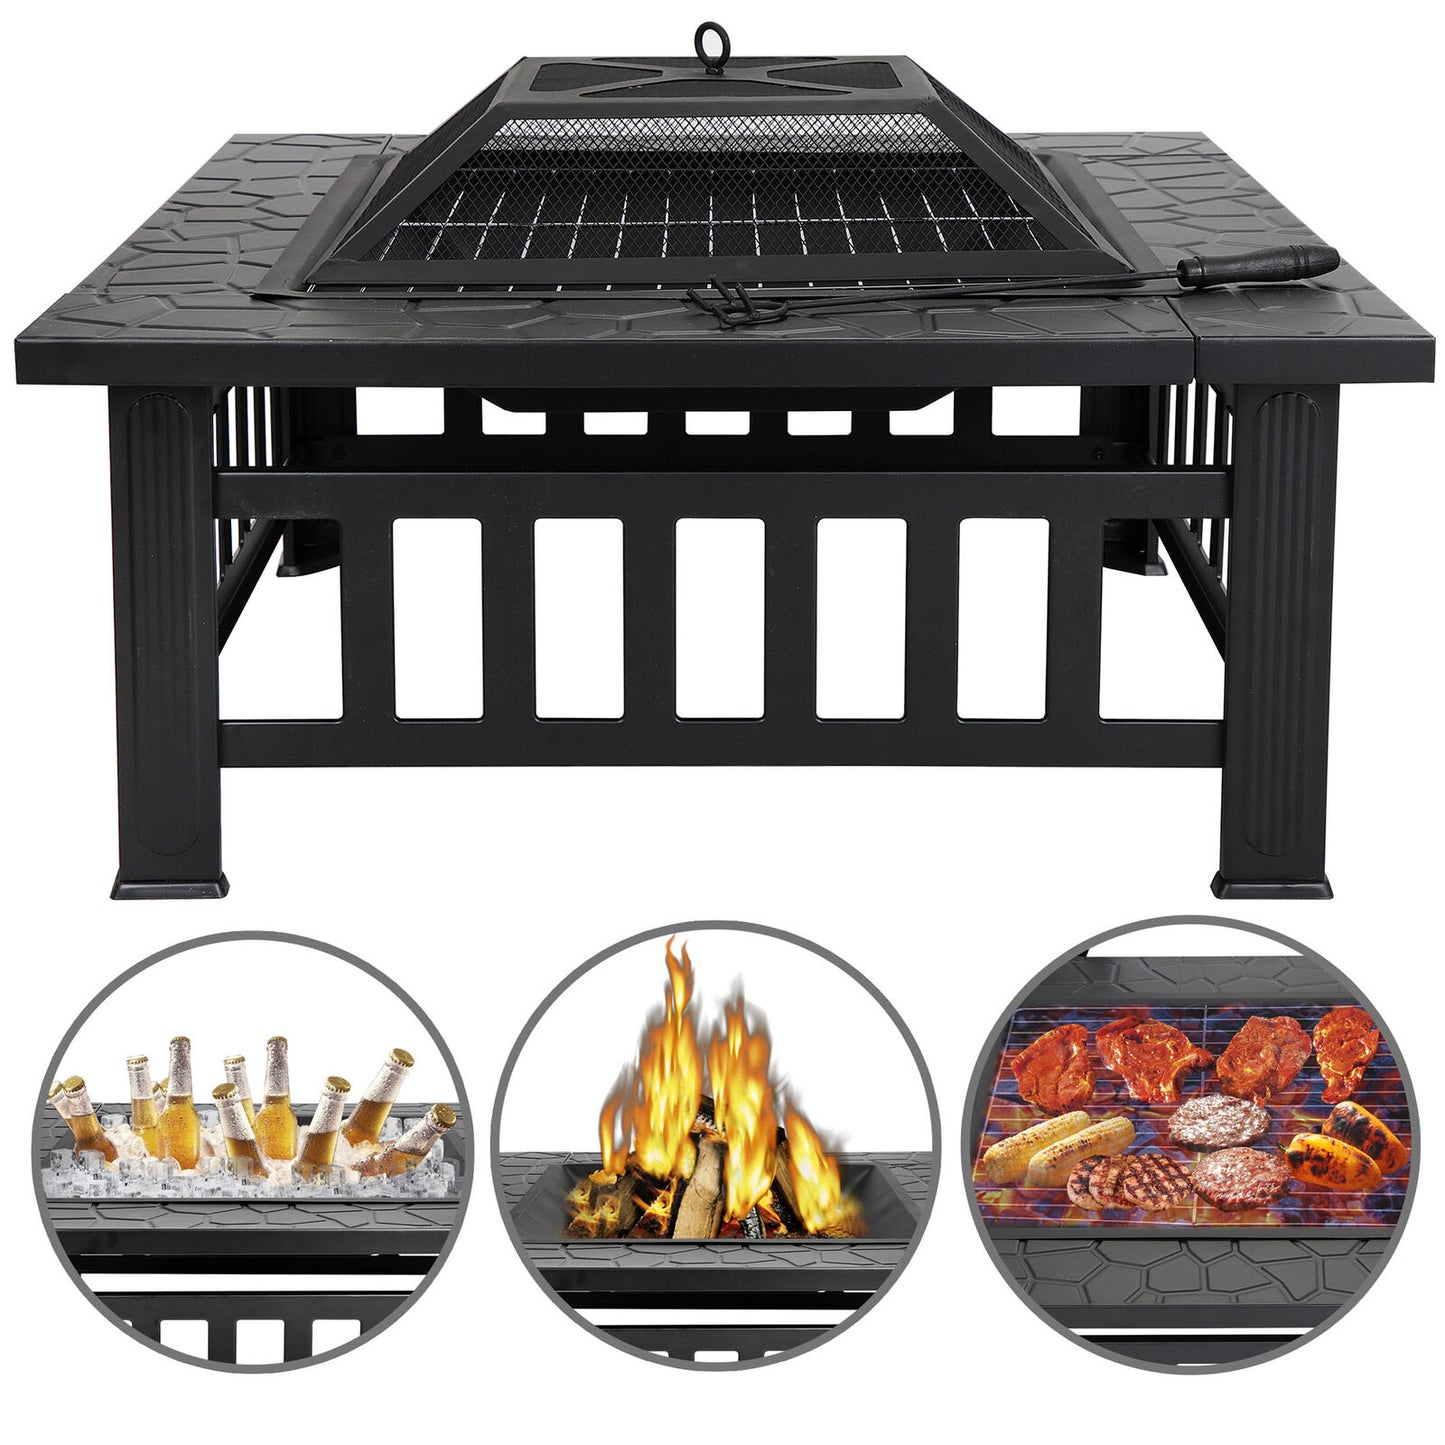 32" Square Metal Fire Pit Outdoor Patio Garden Backyard Stove Firepit Brazier